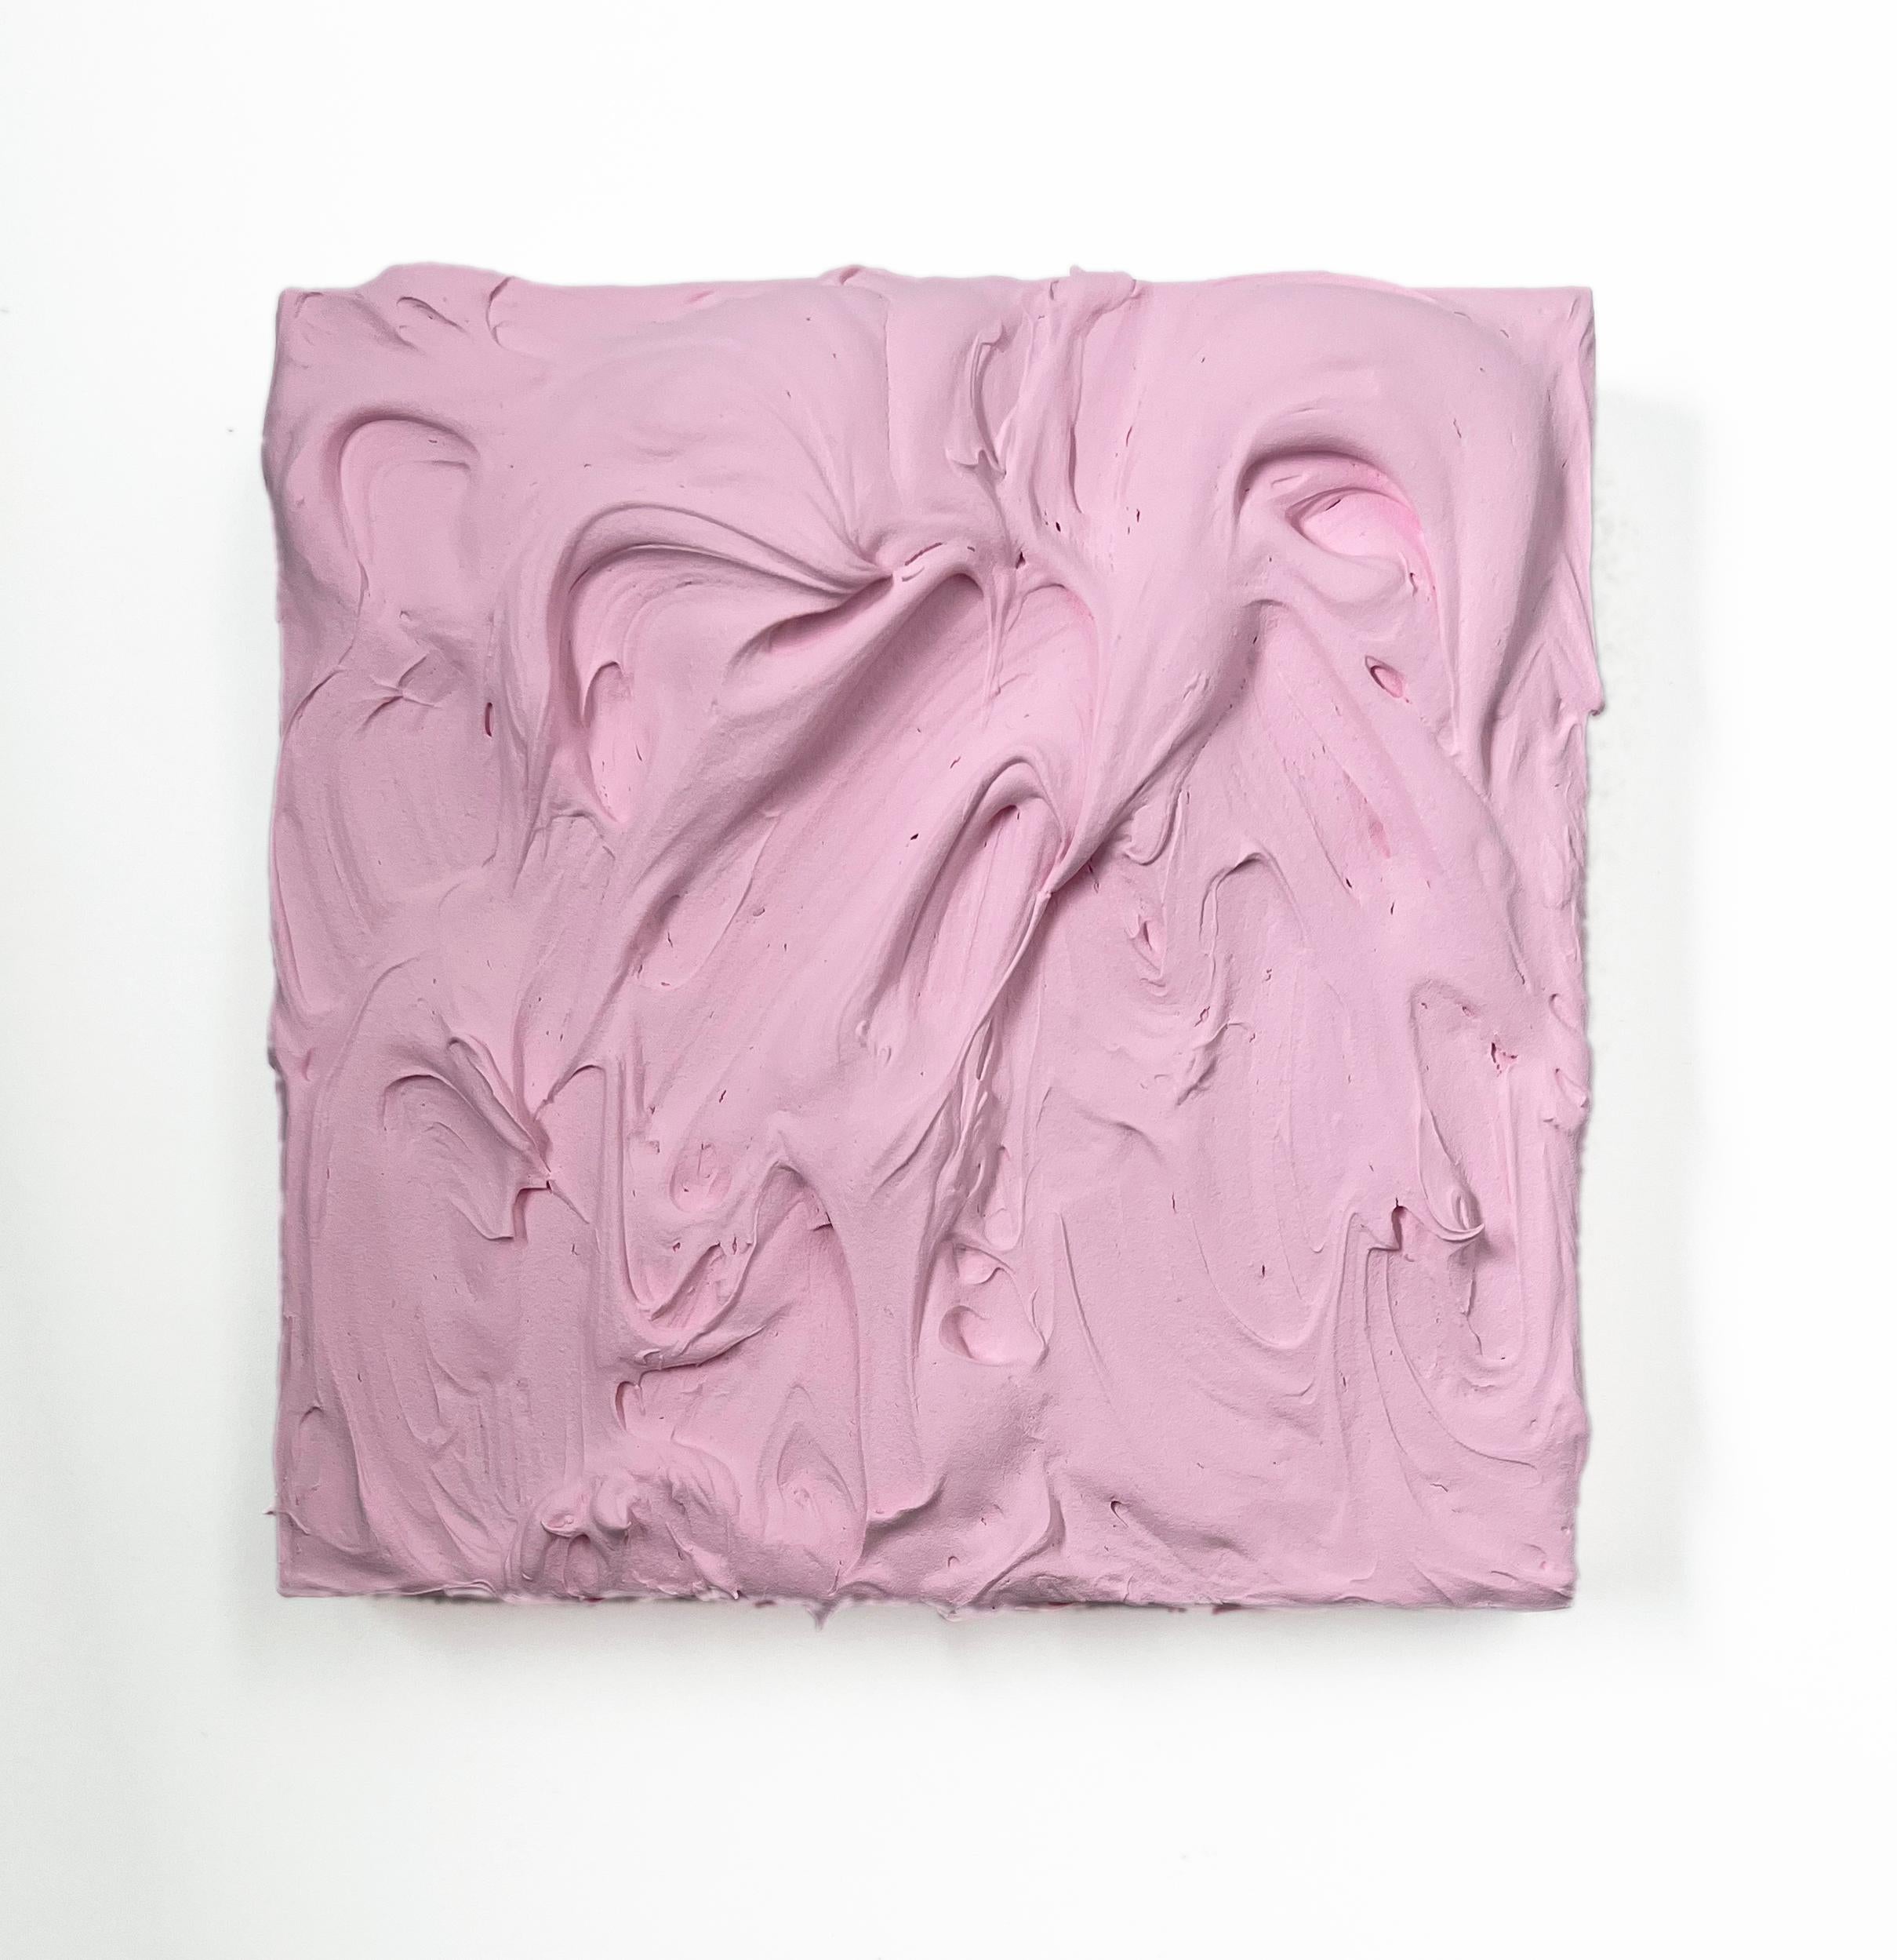 Chloe Hedden Abstract Sculpture – Baby Pink Excess (rotes, dickes, monochromes, quadratisches Pop-Design)